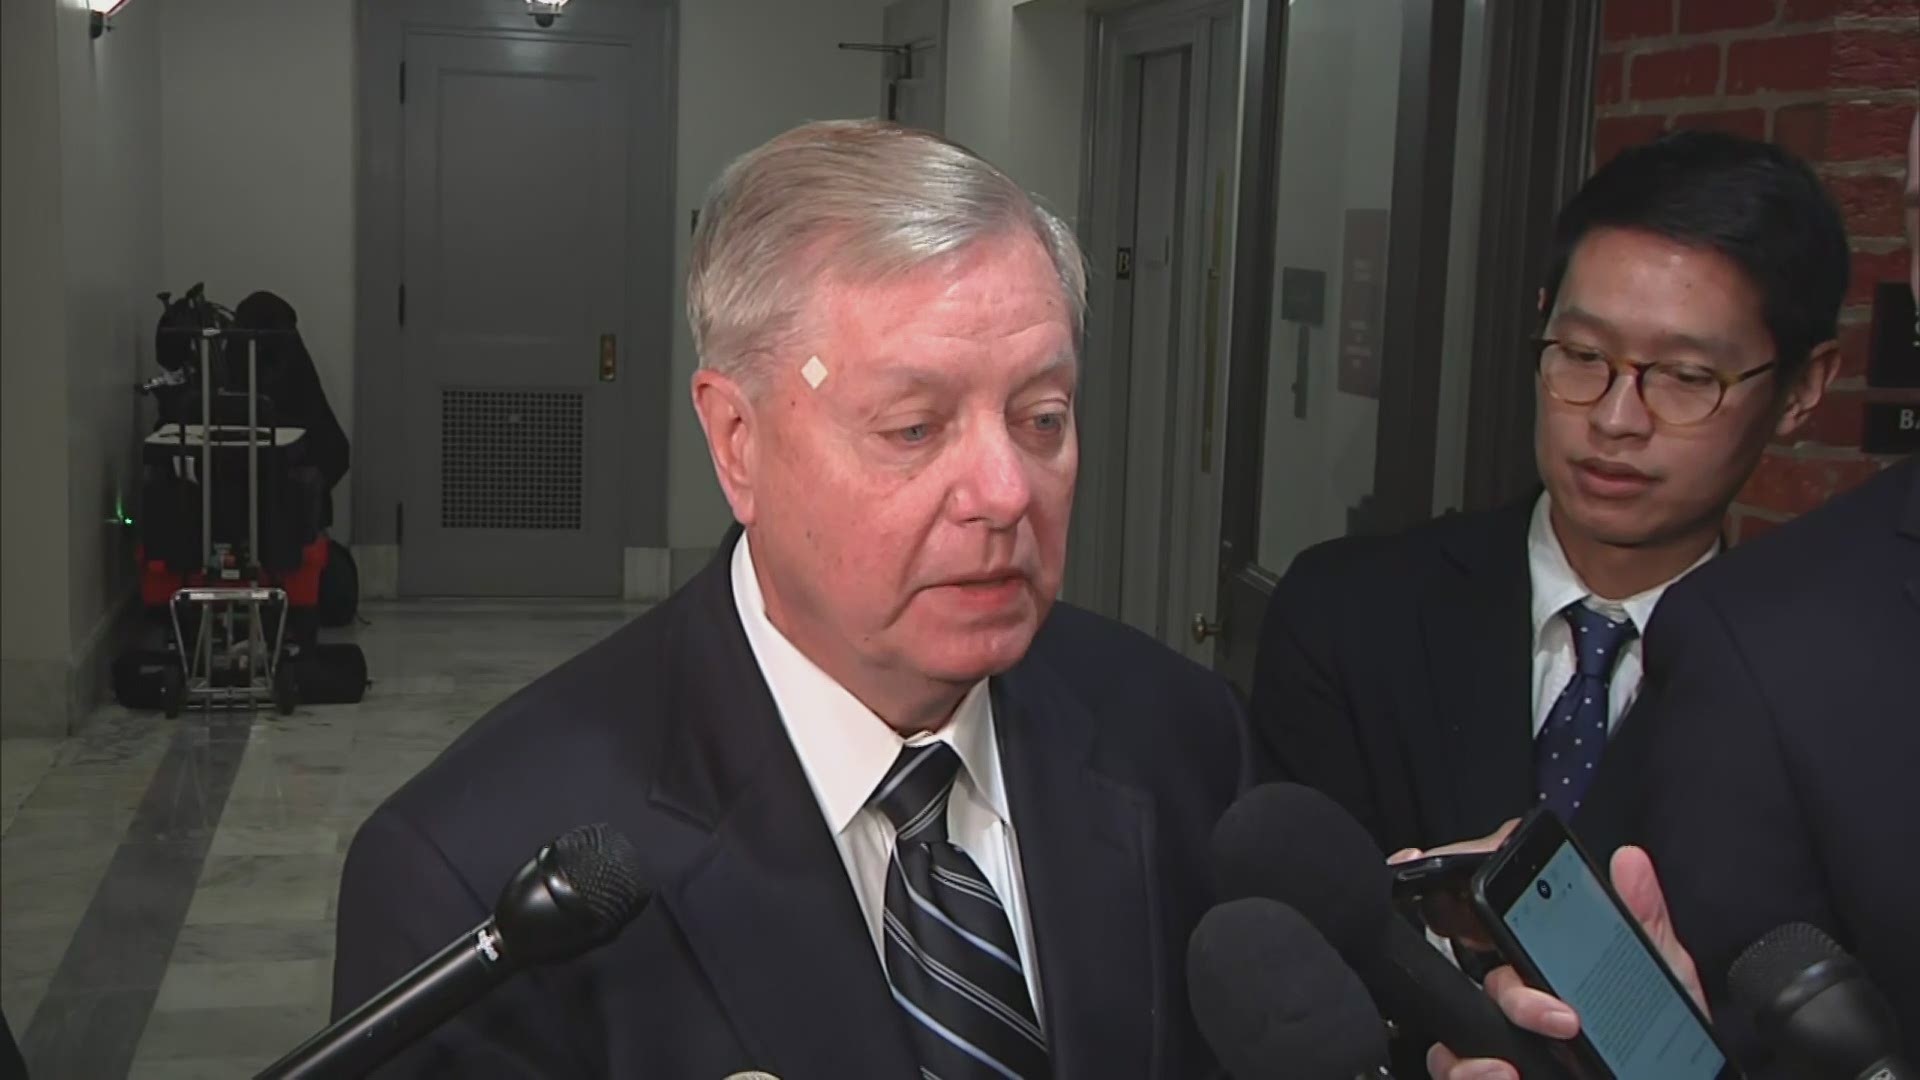 After demanding the release of transcripts of private testimony in the impeachment inquiry of President Trump, Sen. Lindsey Graham says he won't read them.